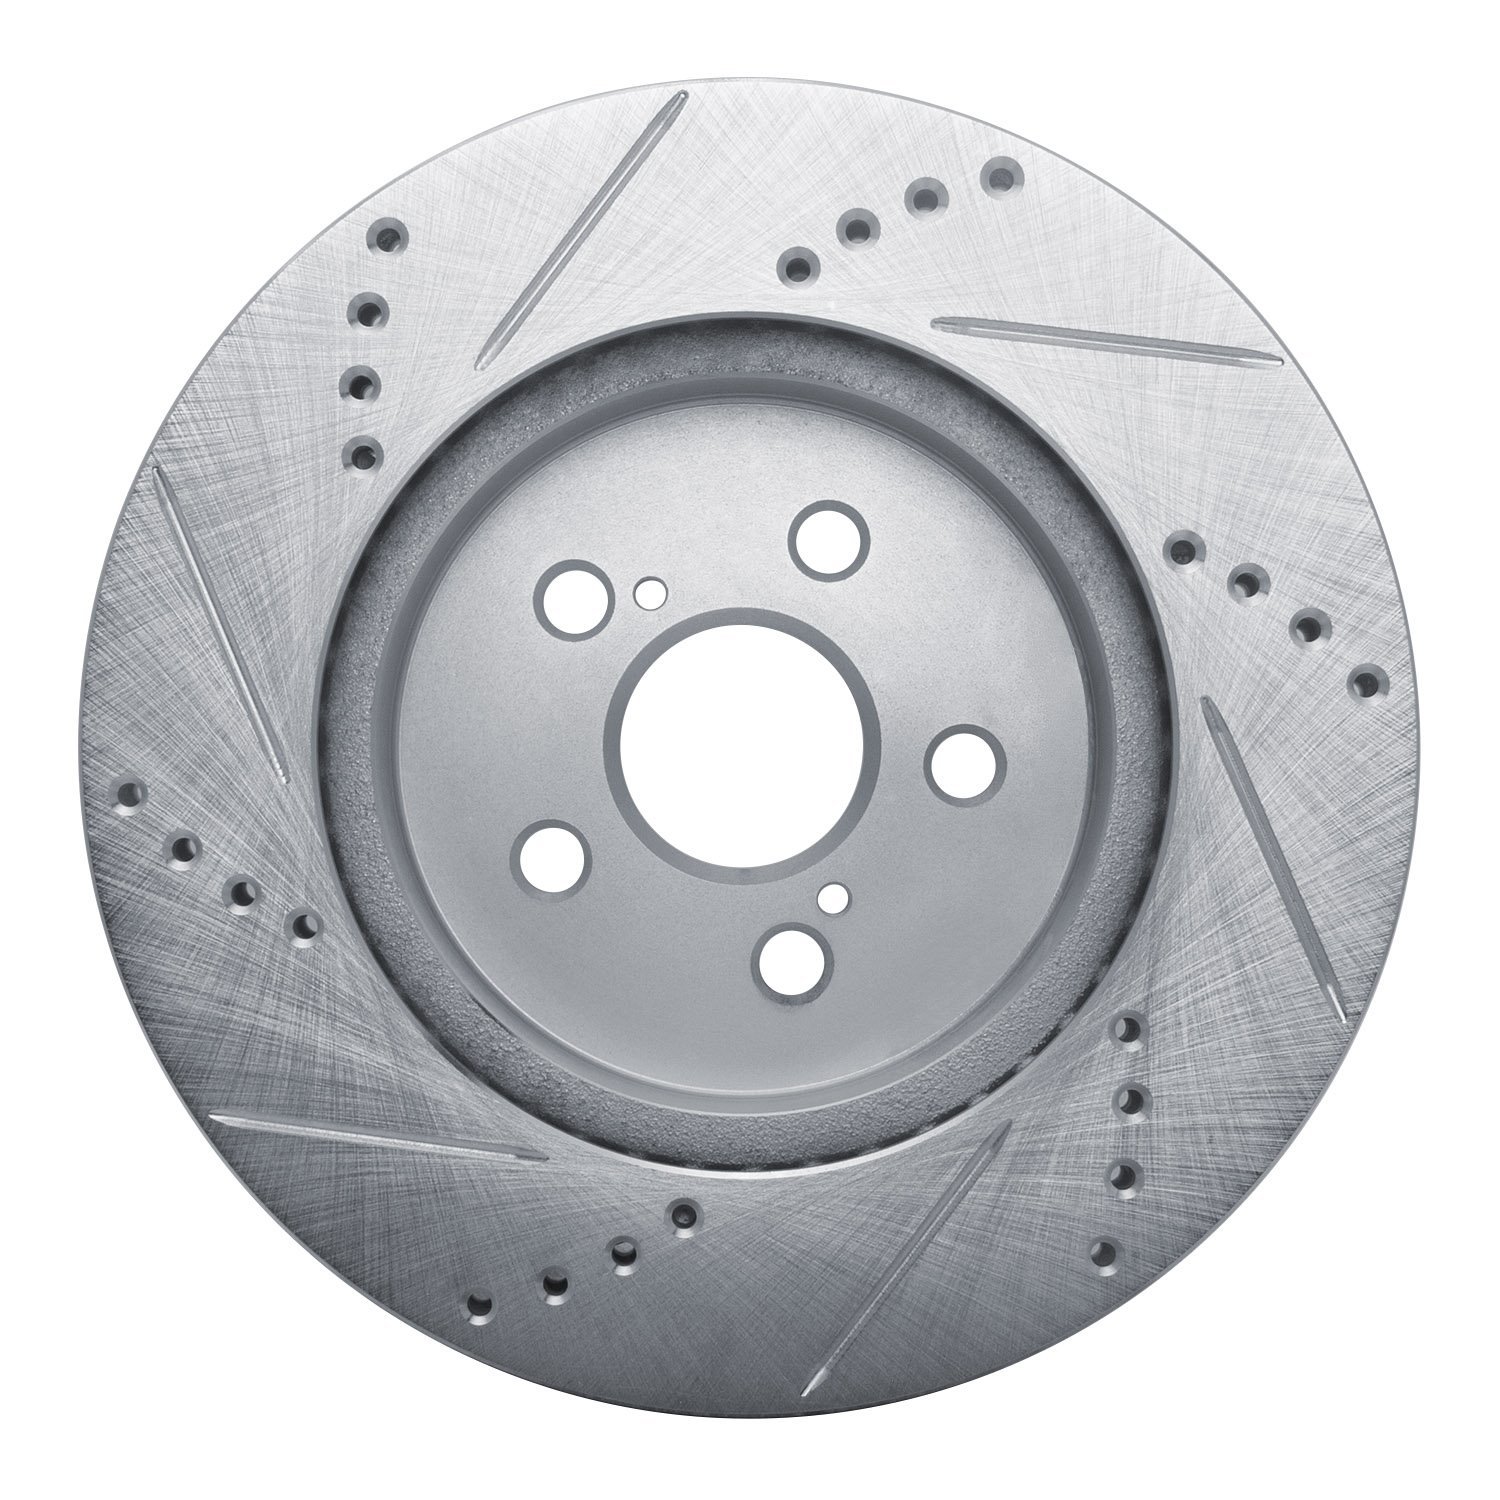 Drilled/Slotted Brake Rotor [Silver], Fits Select Lexus/Toyota/Scion